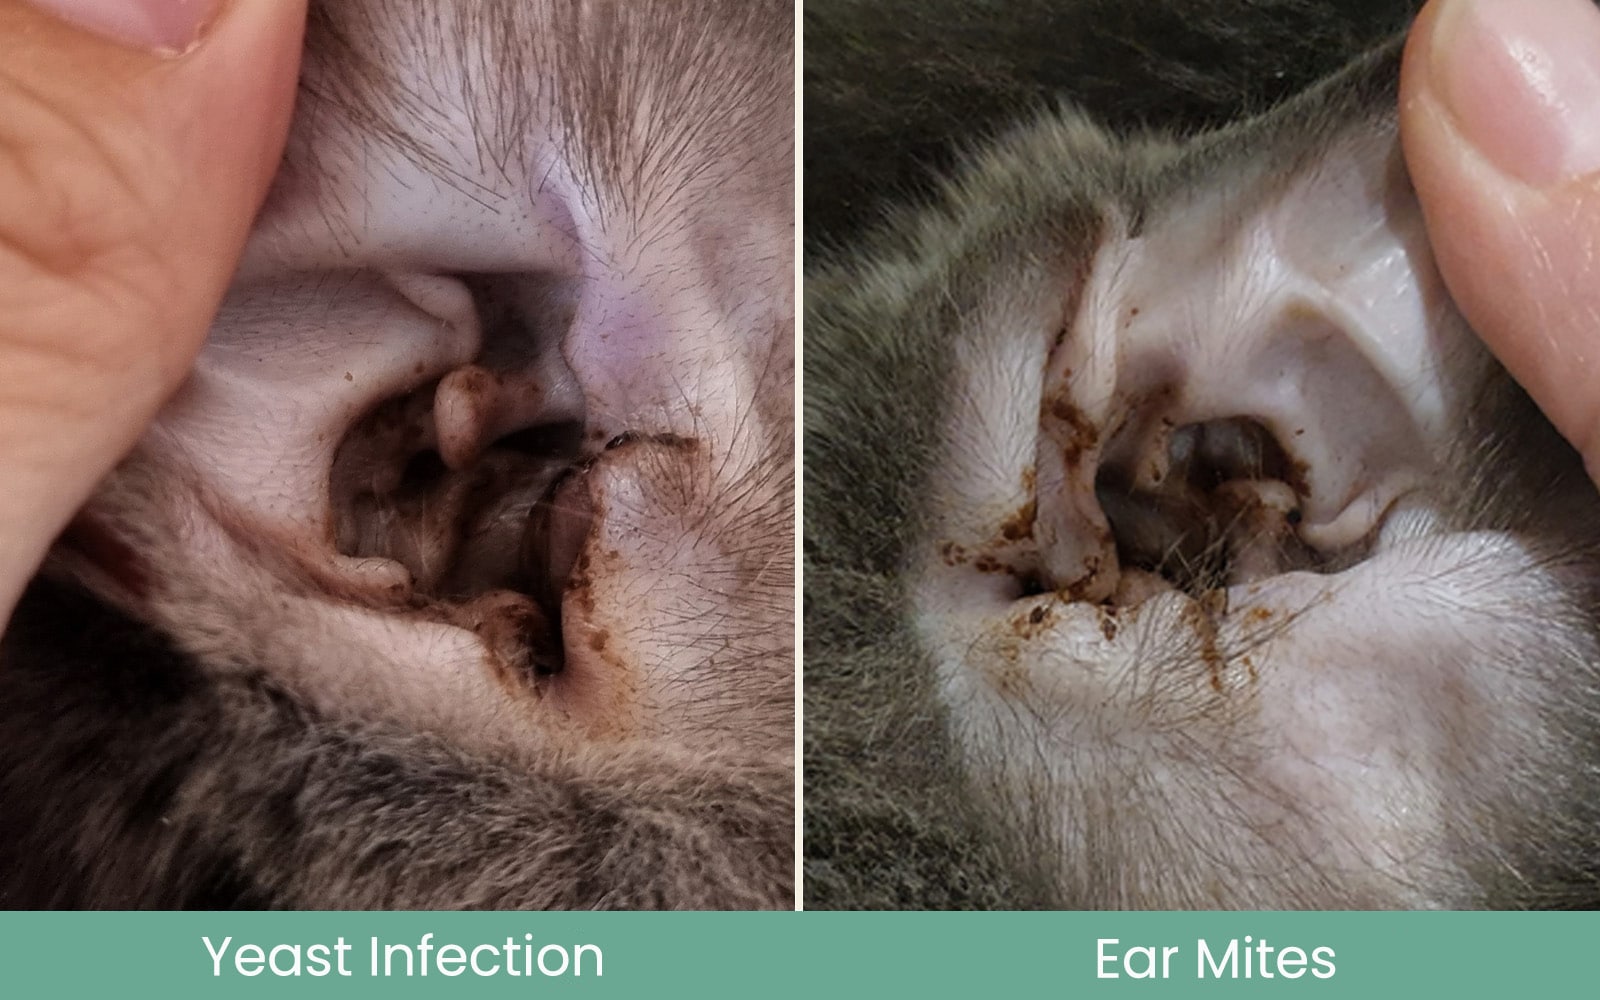 Yeast Infection Ear mites Side By Side